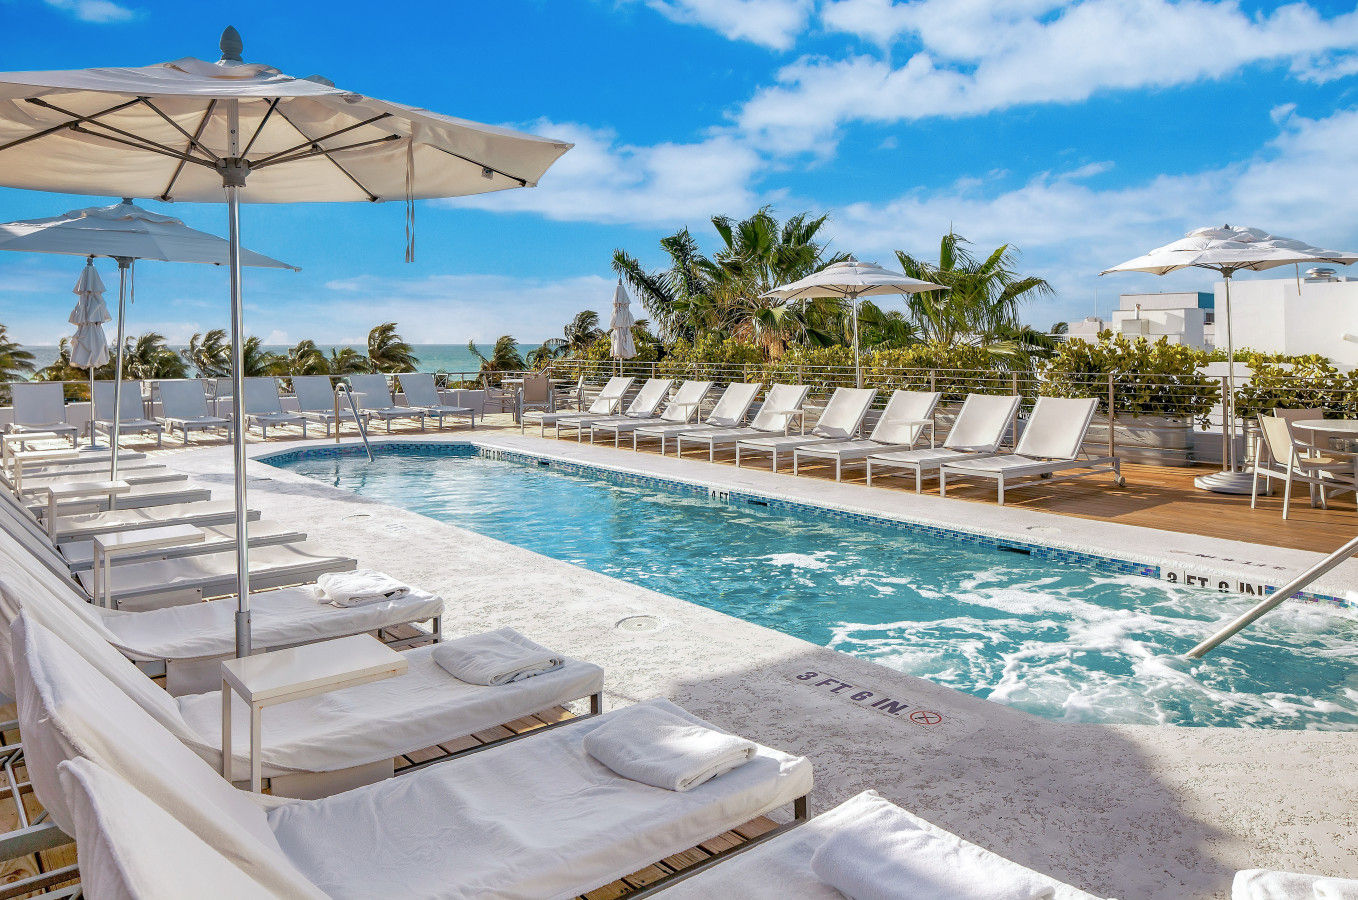 The Hotel of South Beach Special Offer: An Ocean Drive Away